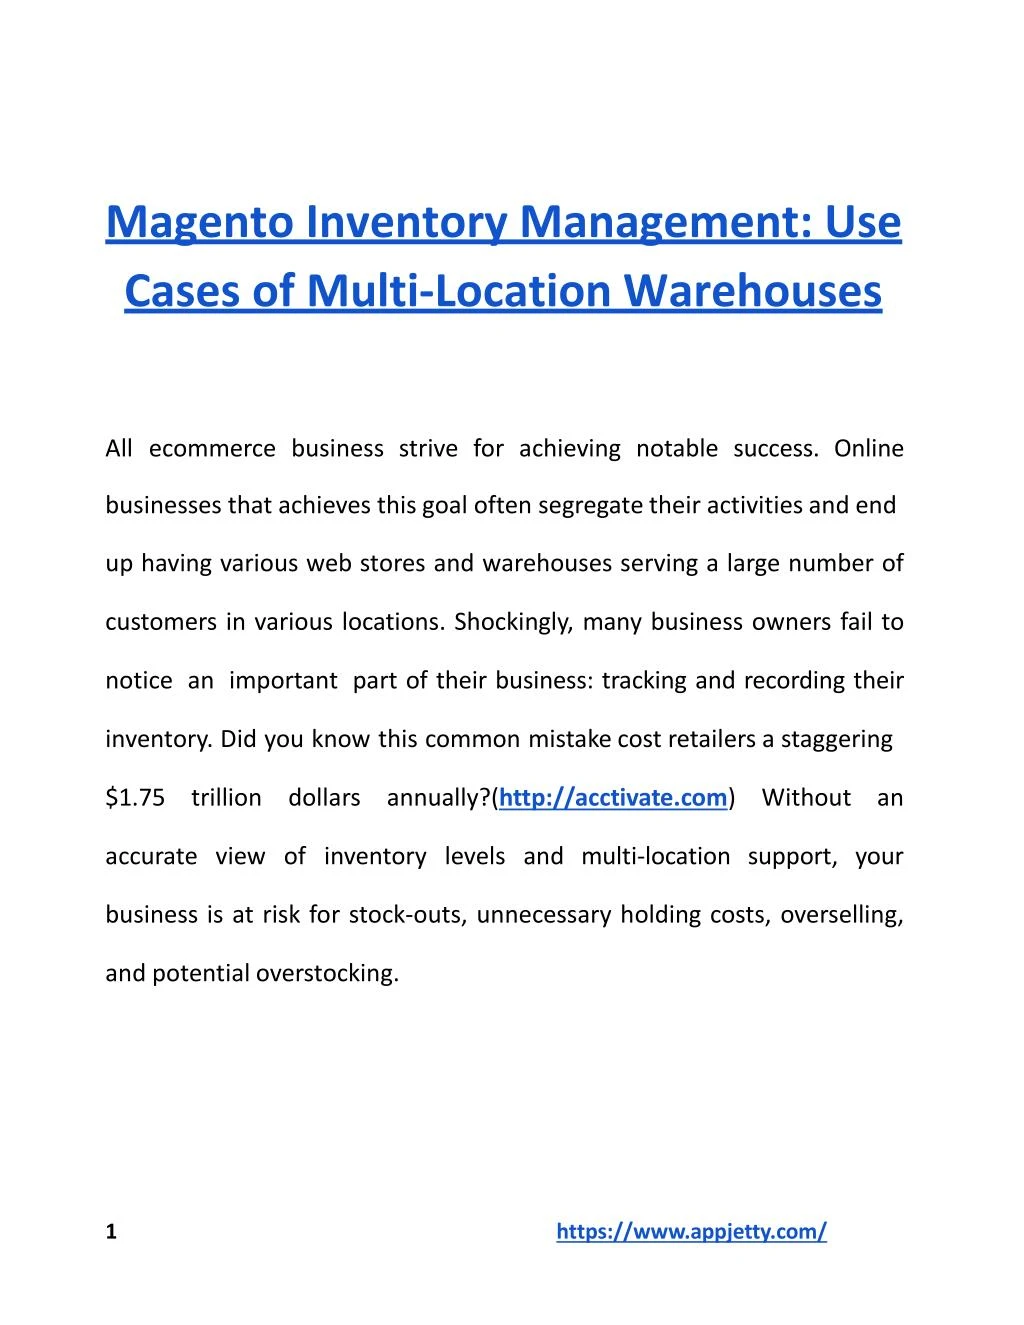 magento inventory management use cases of multi location warehouses